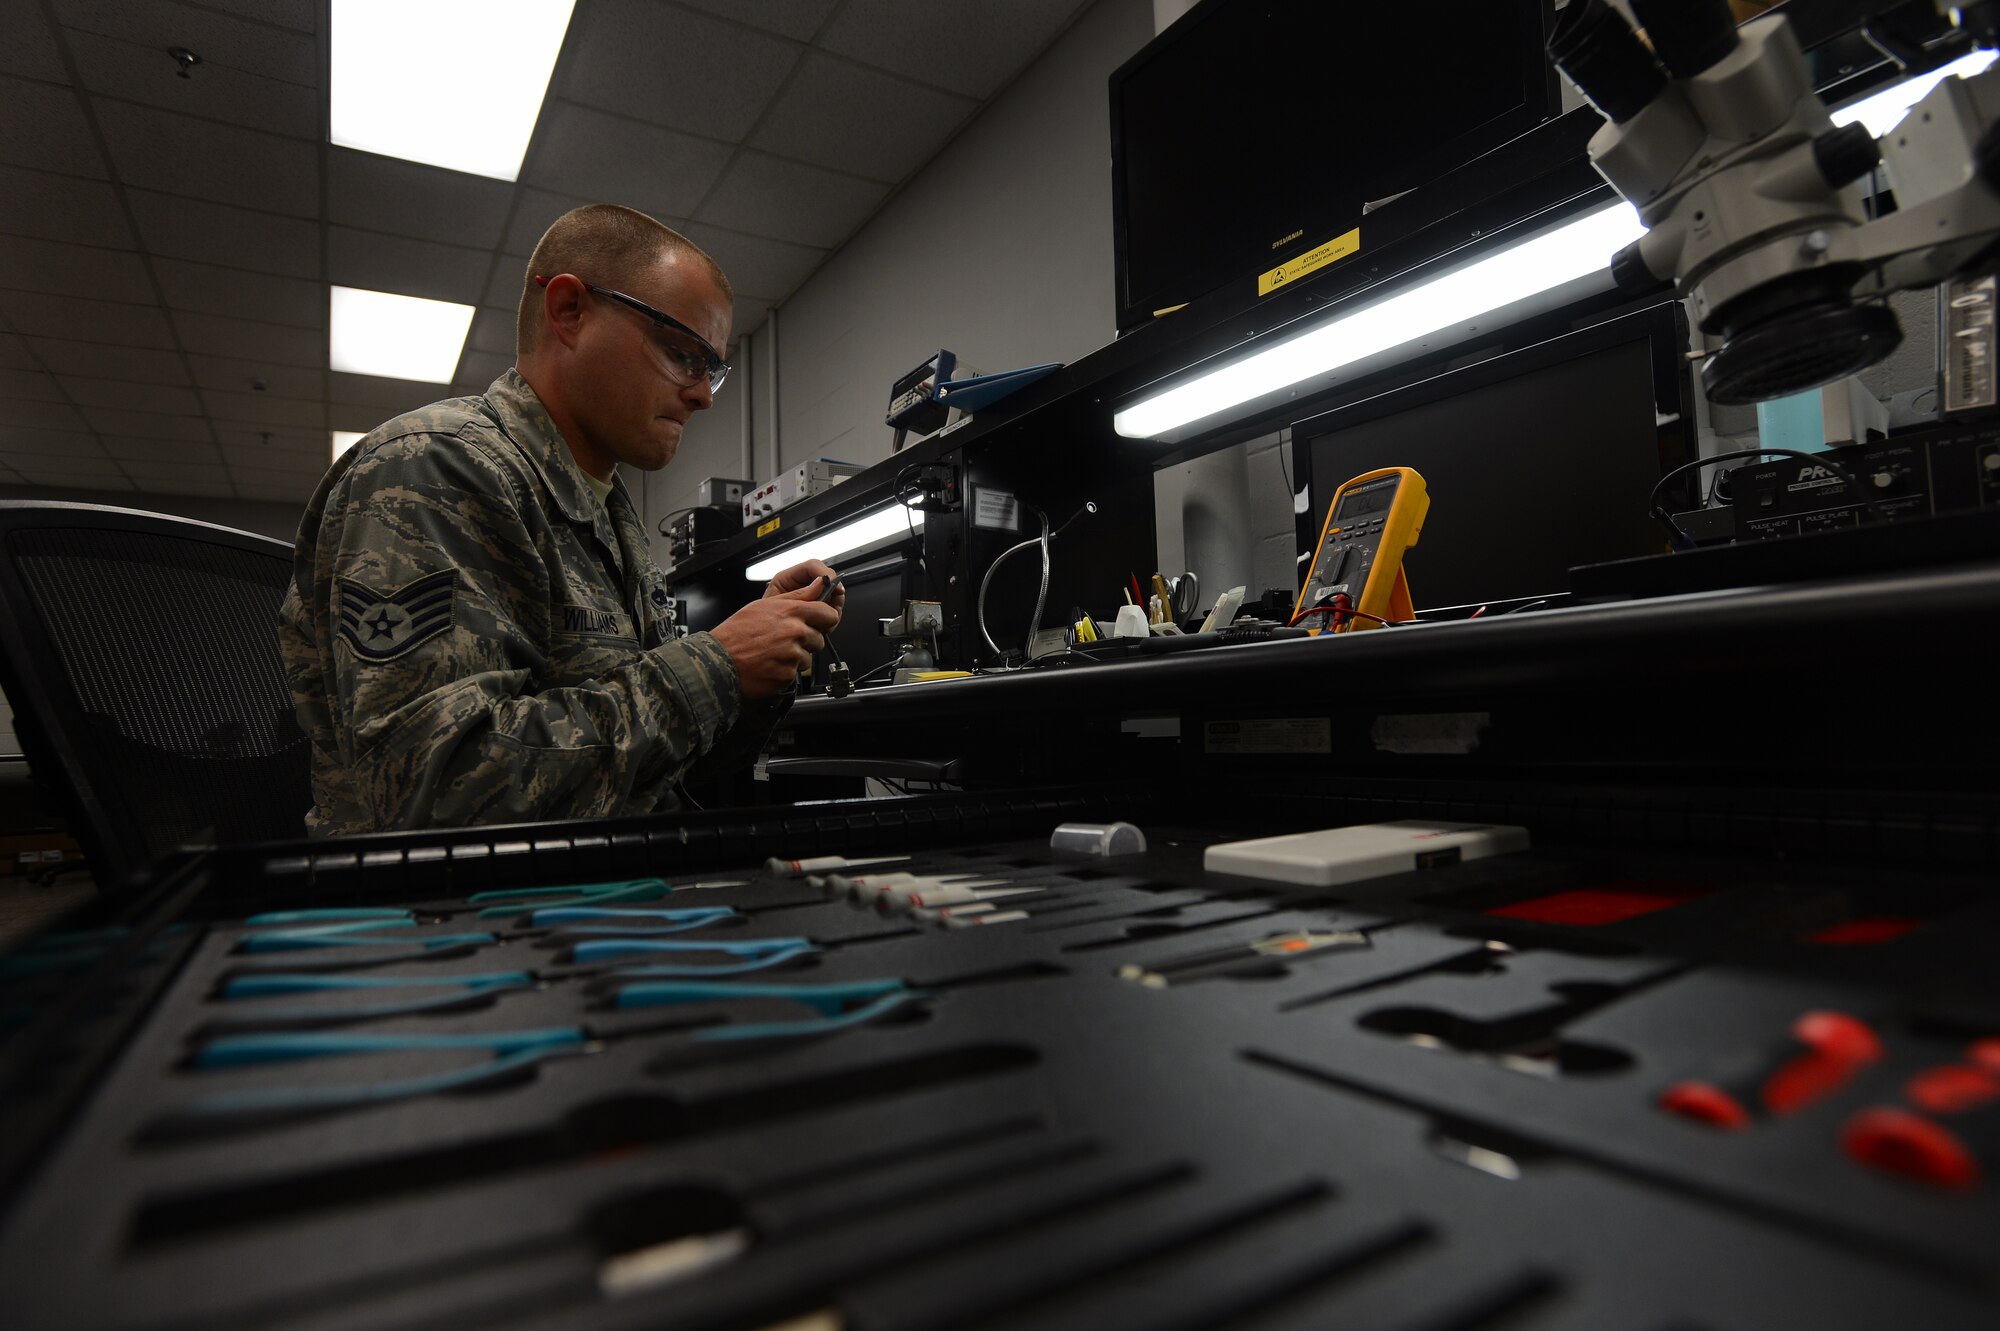 U.S. Air Force Staff Sgt. Scott Williams, 20th Maintenance Group Air Force Repair Enhancement Program technician, cuts a wire rubber casing while determining its damage at Shaw Air Force Base, S.C., May 21, 2014. Williams, one of three 20th Fighter Wing AFREP technicians, fixes approximately two and 10 broken parts a day, potentially saving thousands of dollars each day. (U.S. Air Force photo by Airman 1st Class Jensen Stidham/Released)